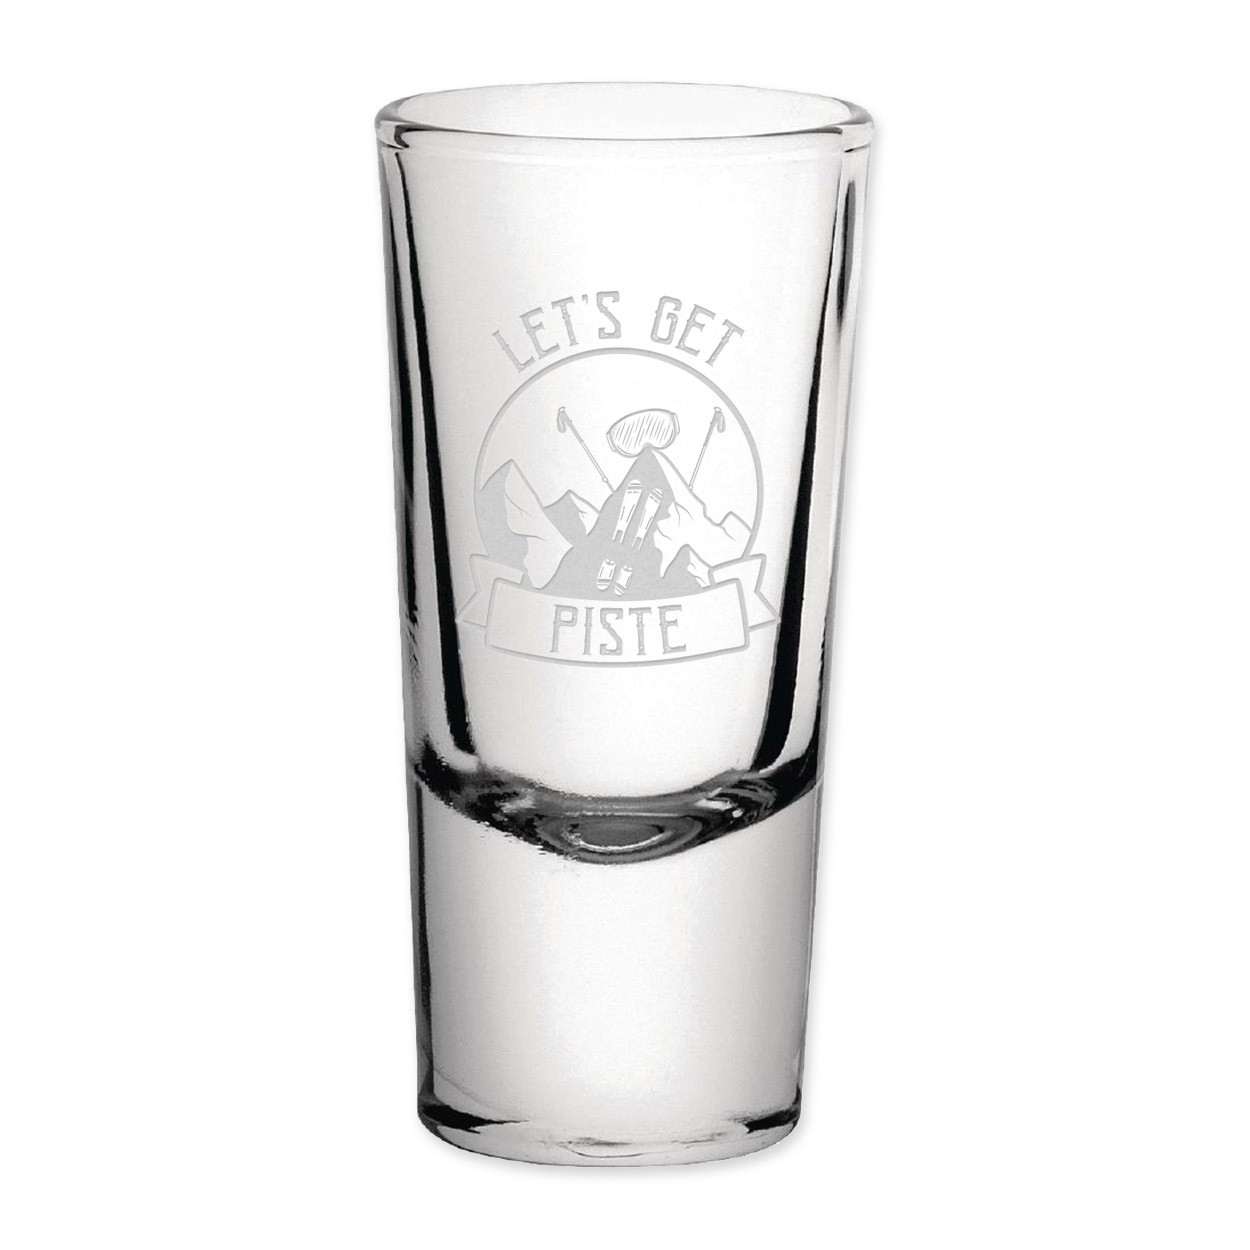 Let's Get Piste Skiing Shot Shooter Glass Name Initials Single 25ml Birthday For Tequila Rum Gin Whisky Wedding Stag Hen Do Custom 